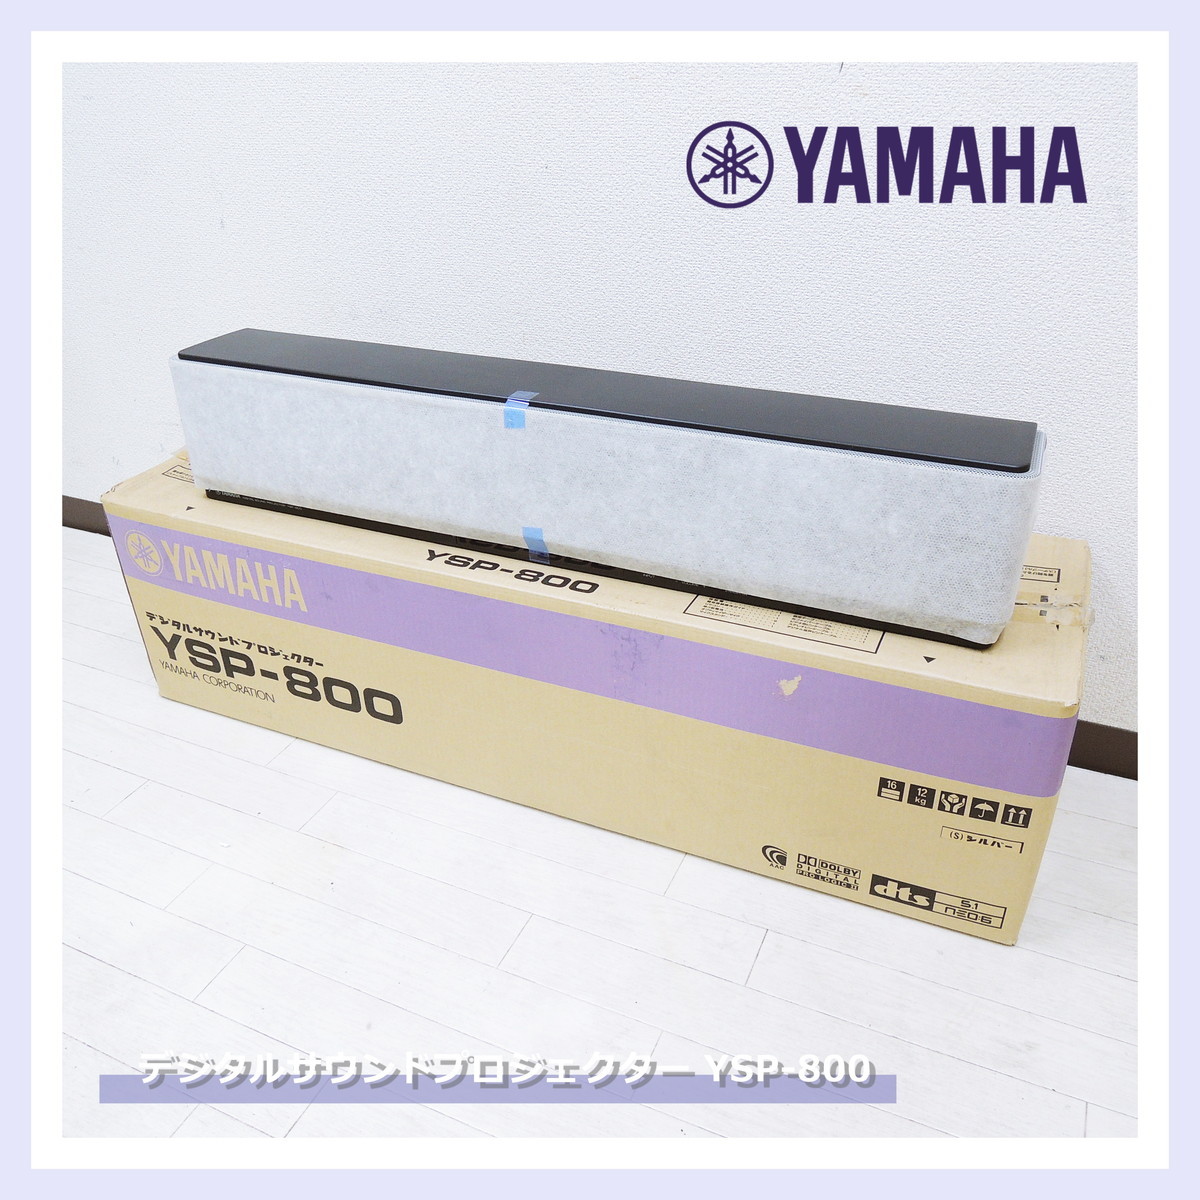 [ prompt decision! first come, first served!] Yamaha YSP-800 digital projector YAMAHA sound bar 